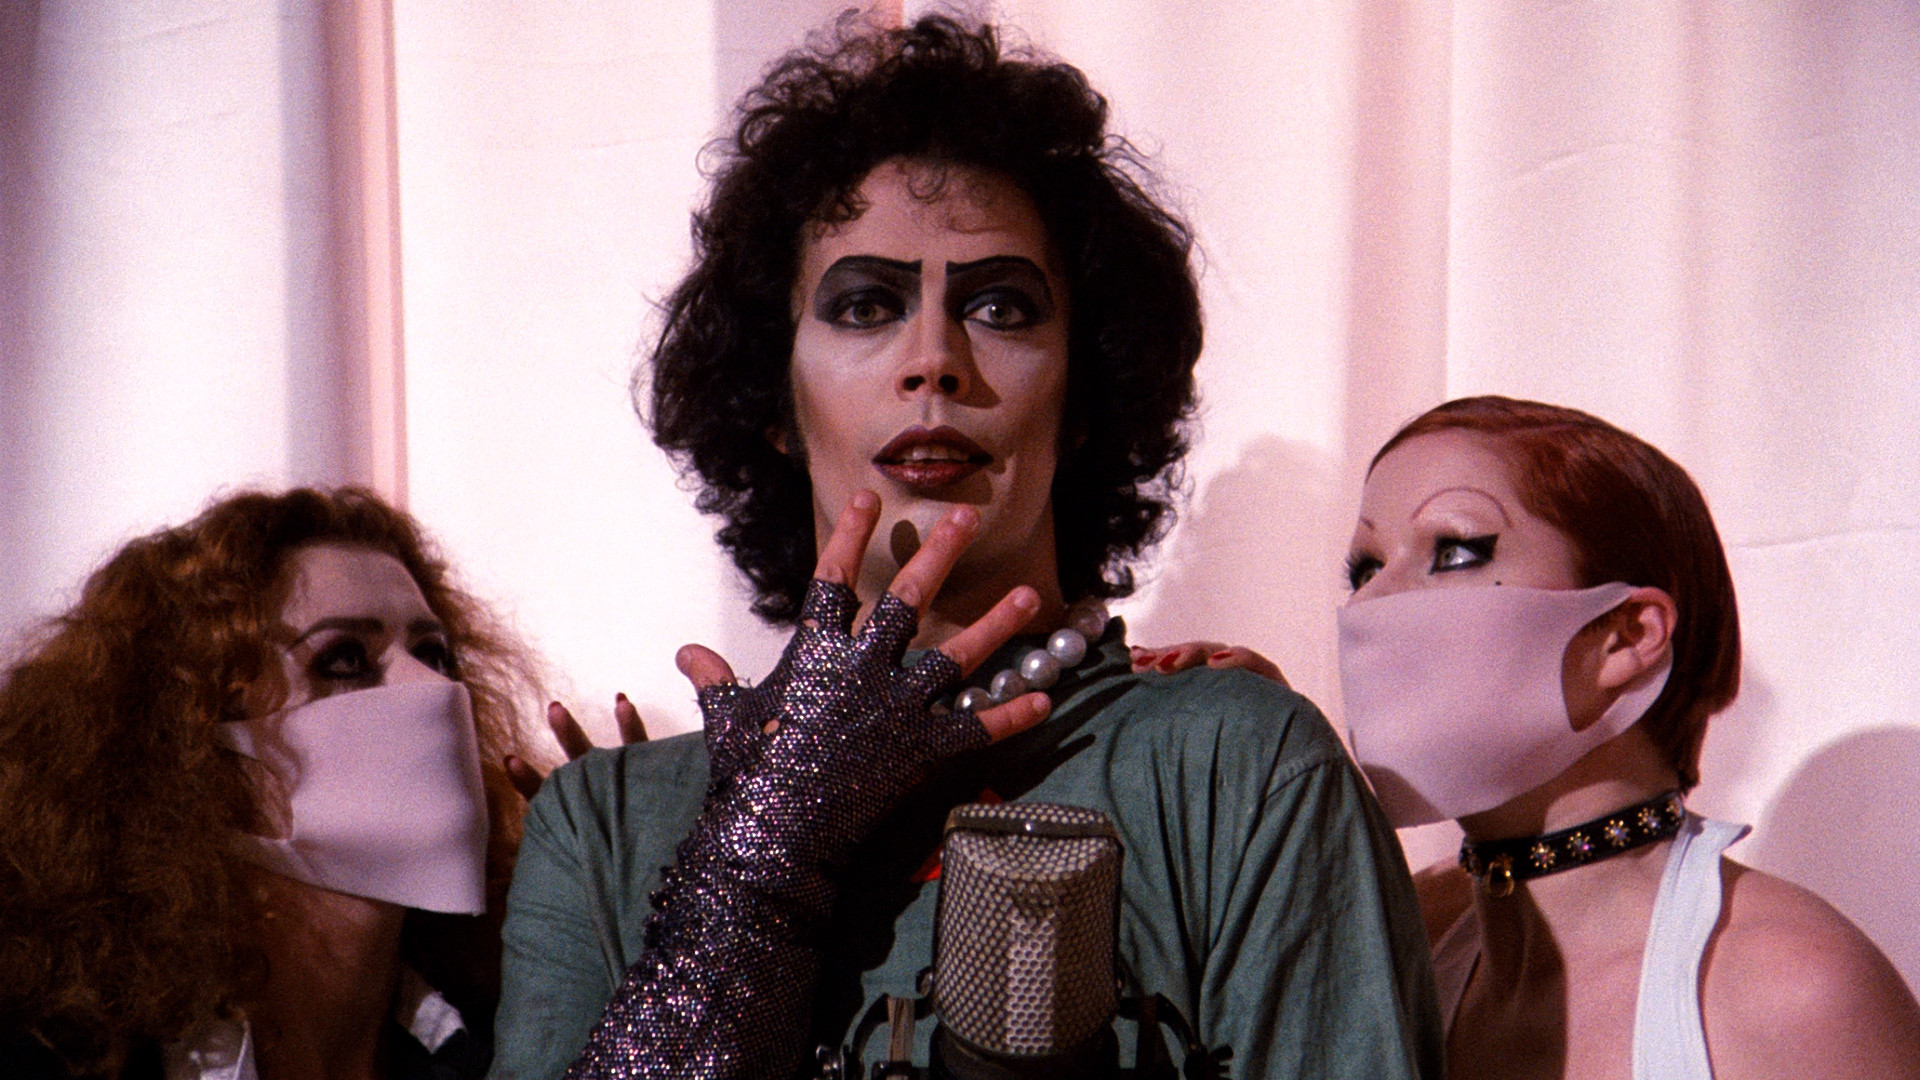 “Rocky Horror Picture Show”: beyond the rocky beginnings